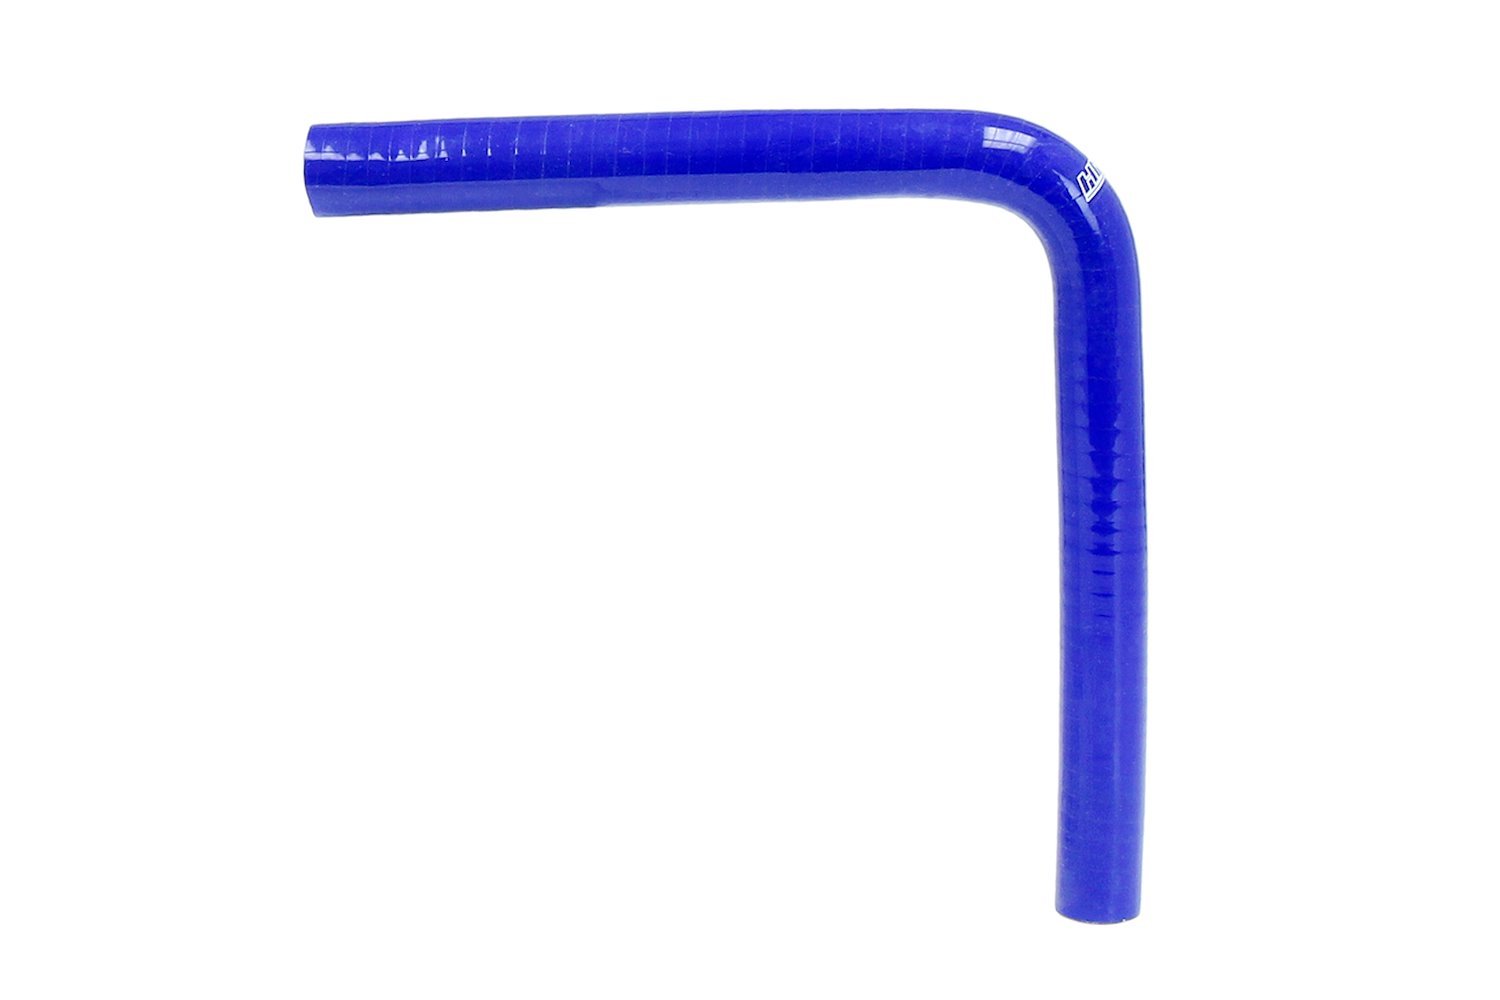 HTSEC90-025-L10-BLUE Silicone 90-Degree Elbow Hose, High-Temp 4-Ply Reinforced, 1/4 in. ID, 10 in. Leg, Blue